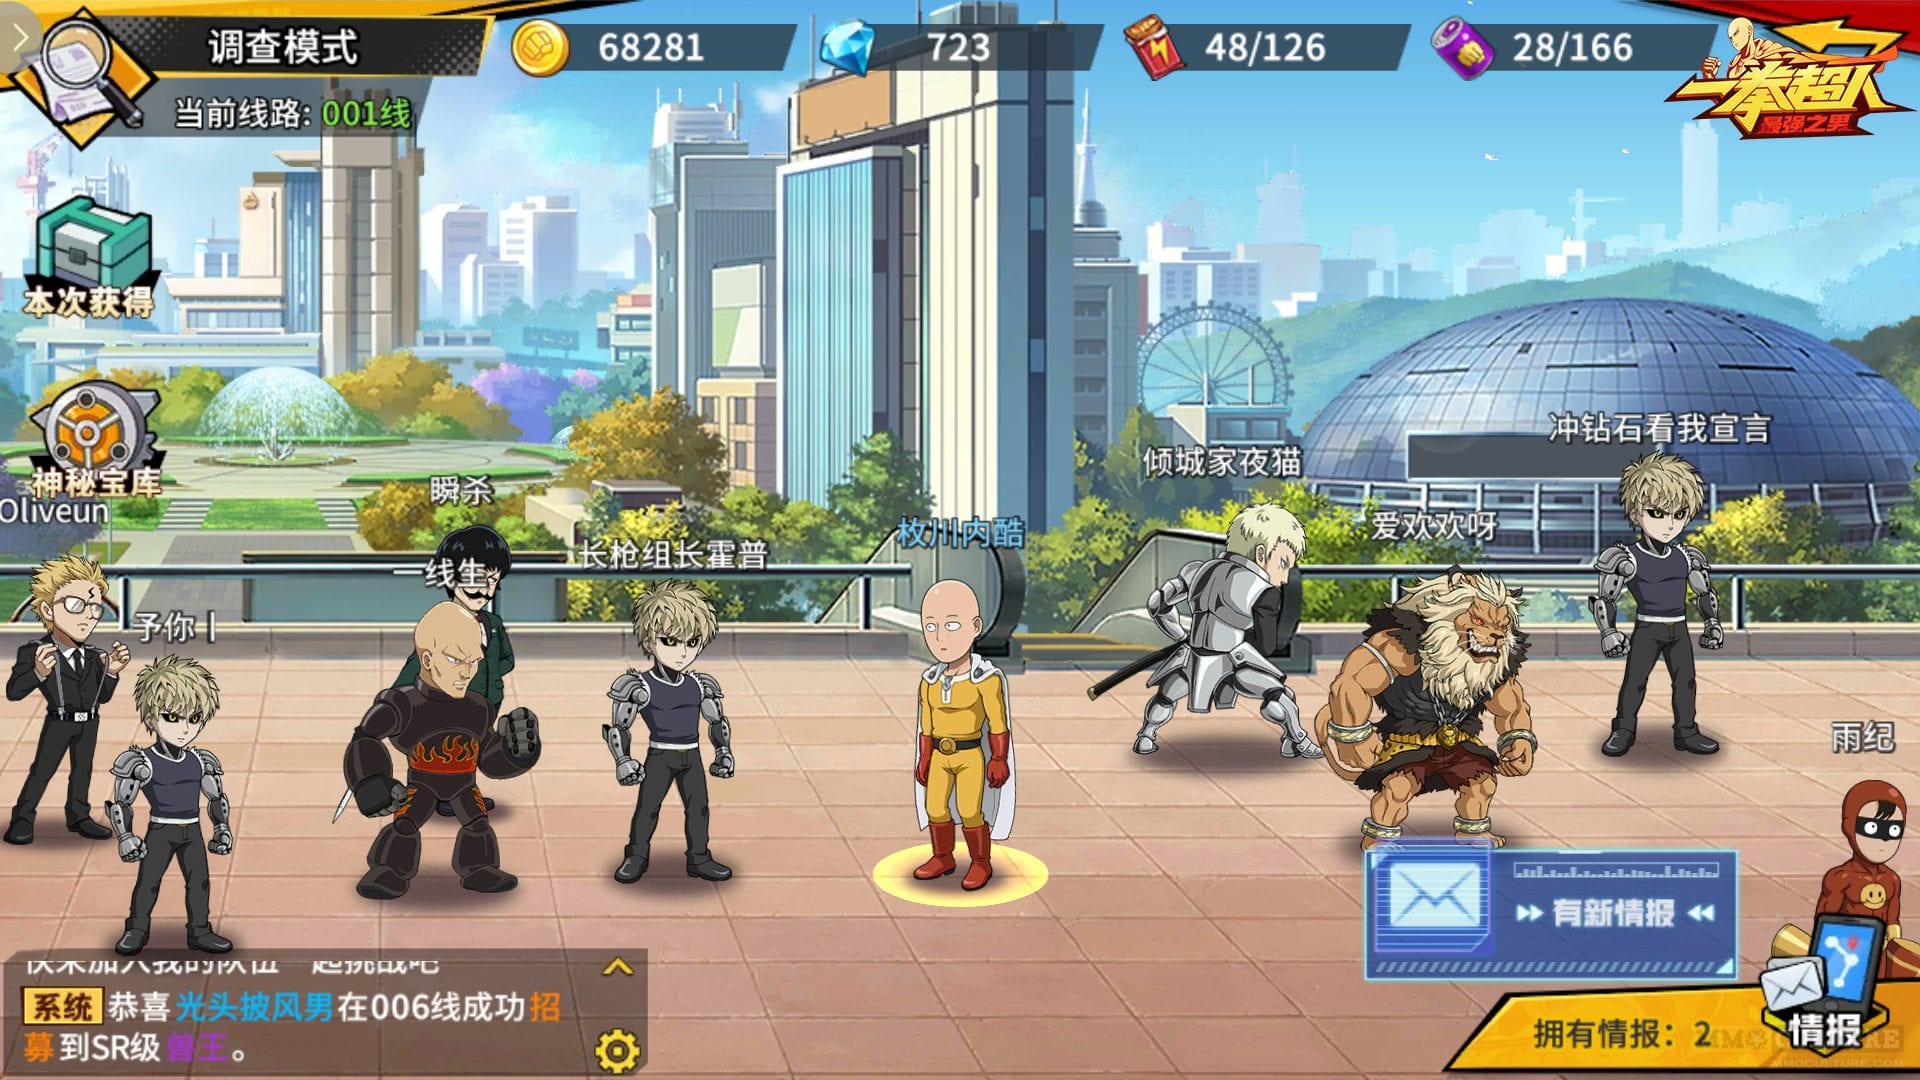 Step into One Punch Man universe with free-to-play mobile game